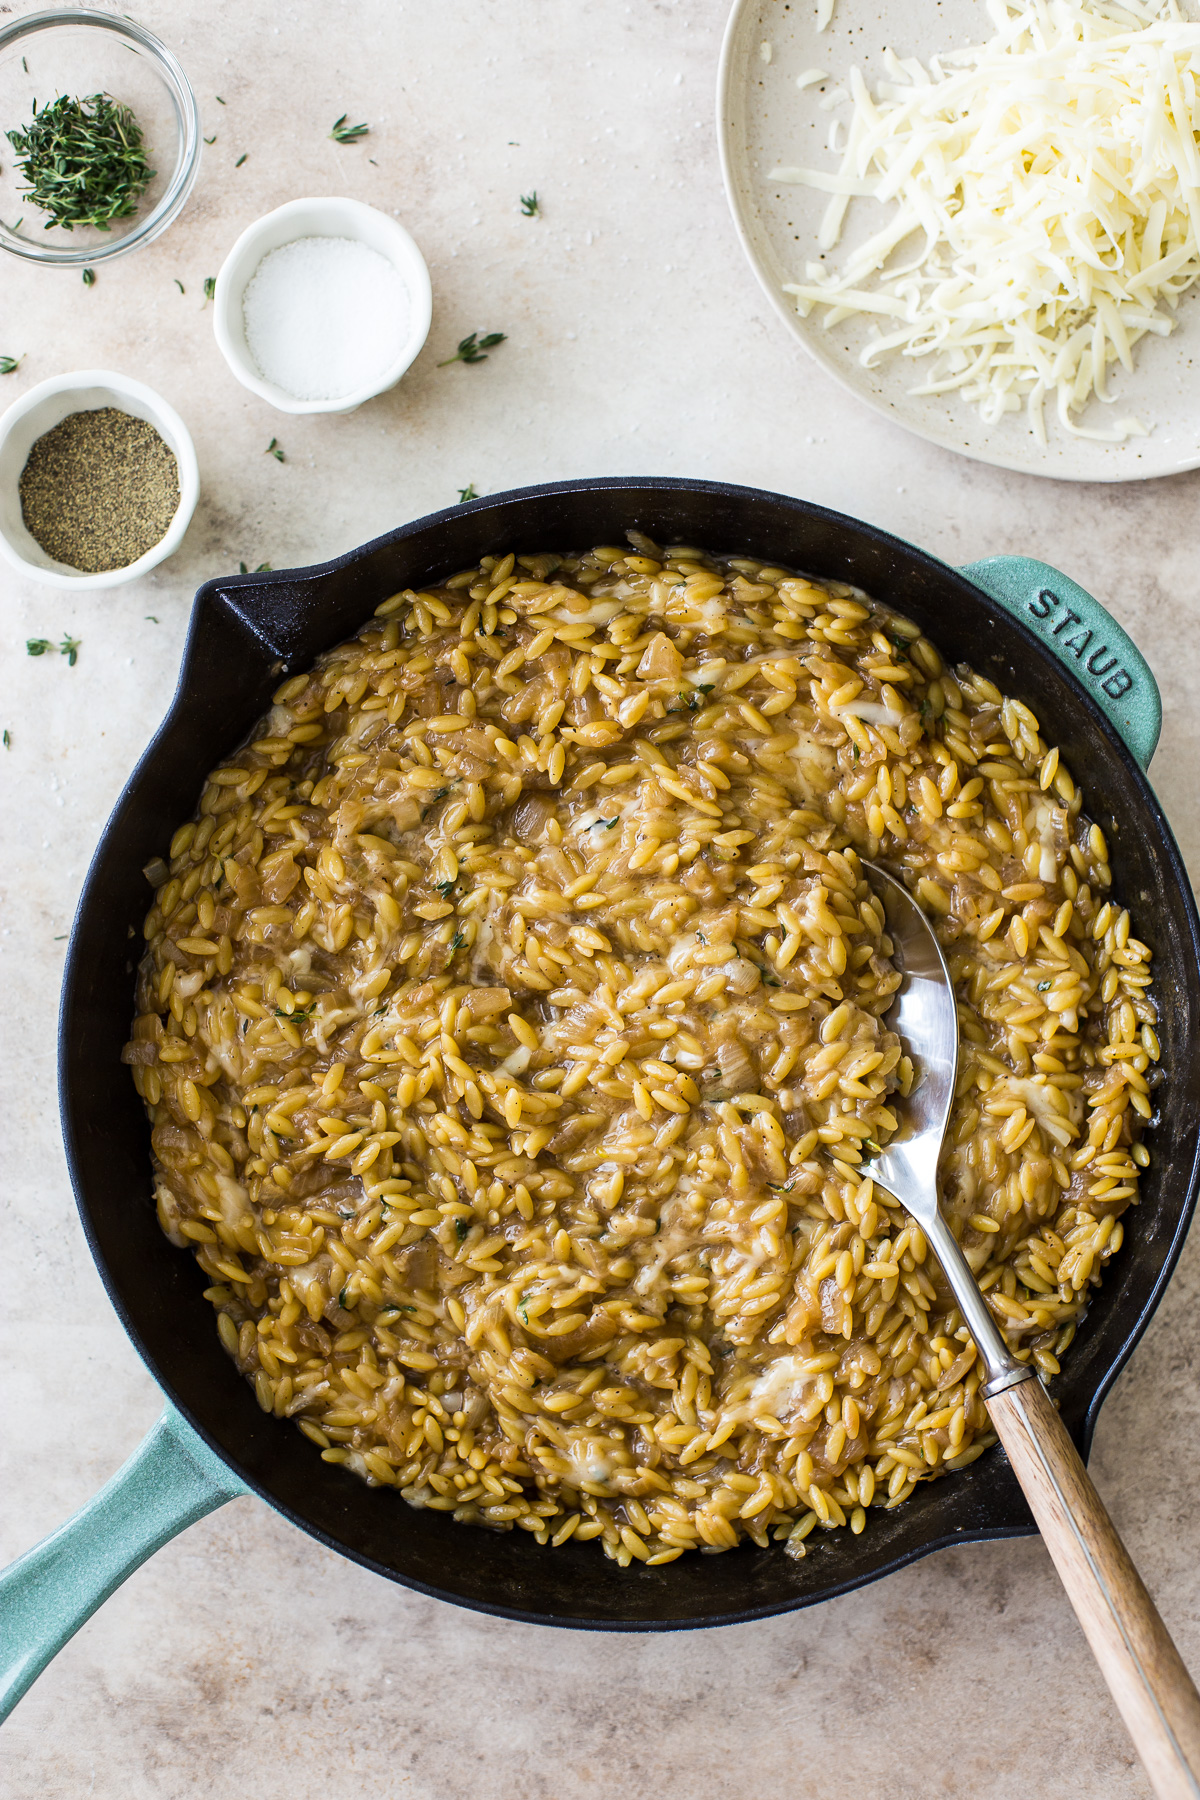 https://thebeachhousekitchen.com/wp-content/uploads/2022/05/French-Onion-Orzo-Feature-1-of-1.jpg